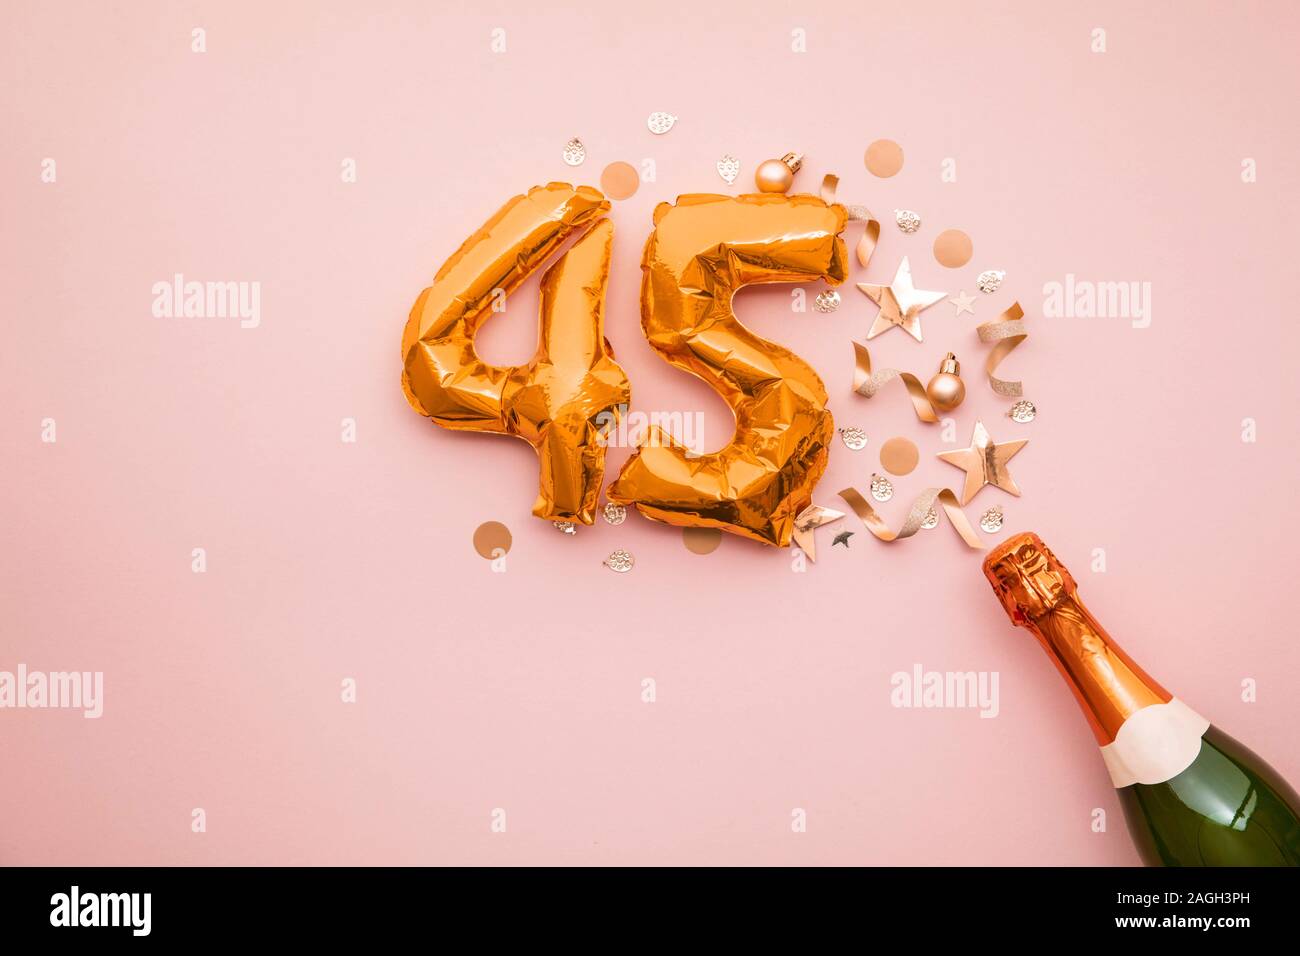 Happy 45th anniversary party. Champagne bottle with gold number balloon. Stock Photo